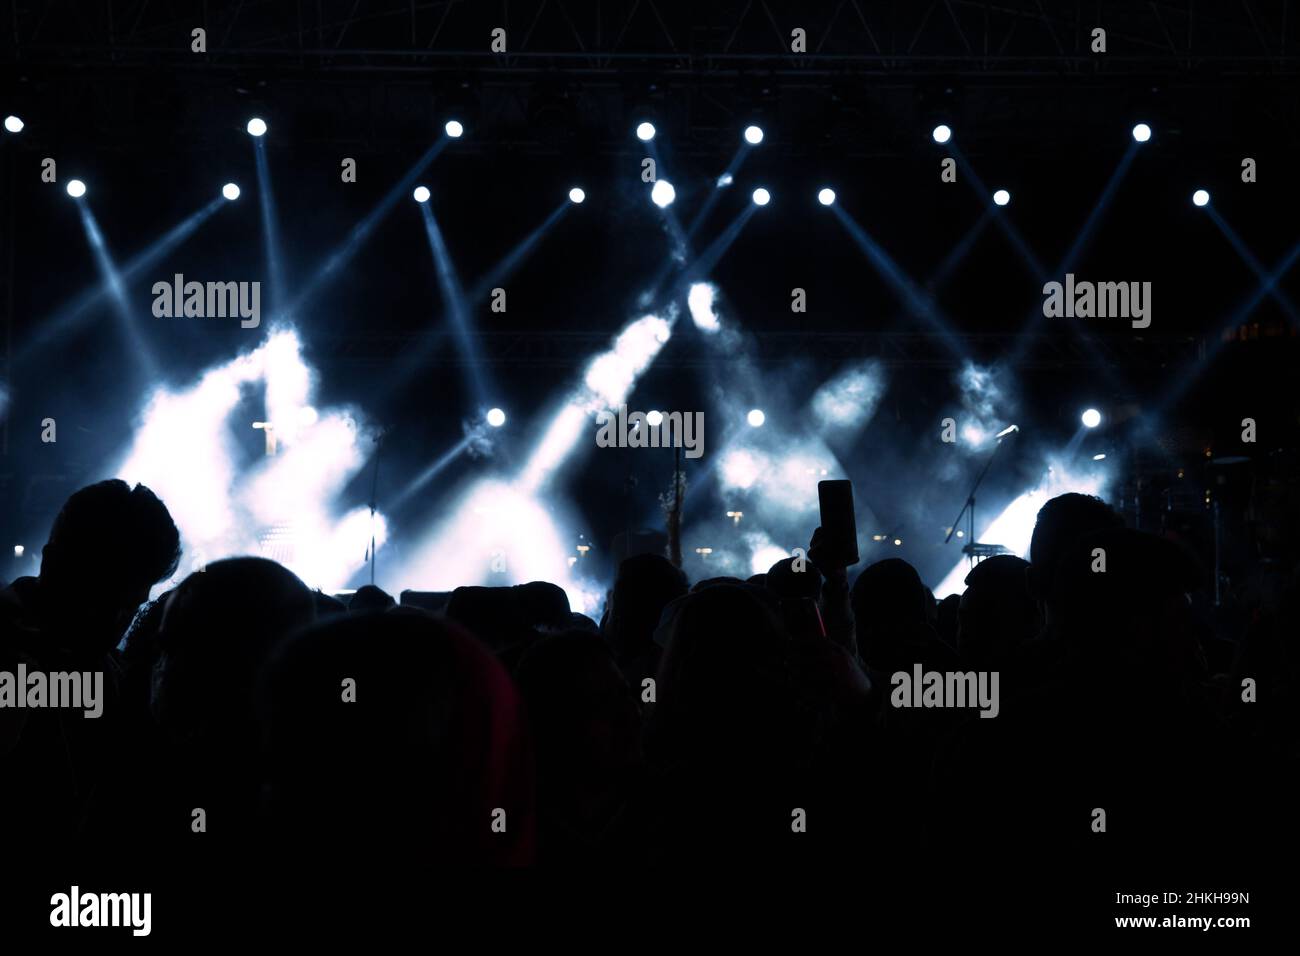 Spotlight on stage. Concert background with foggy effect on the stage. Silhouette of people. Noise included. Stock Photo